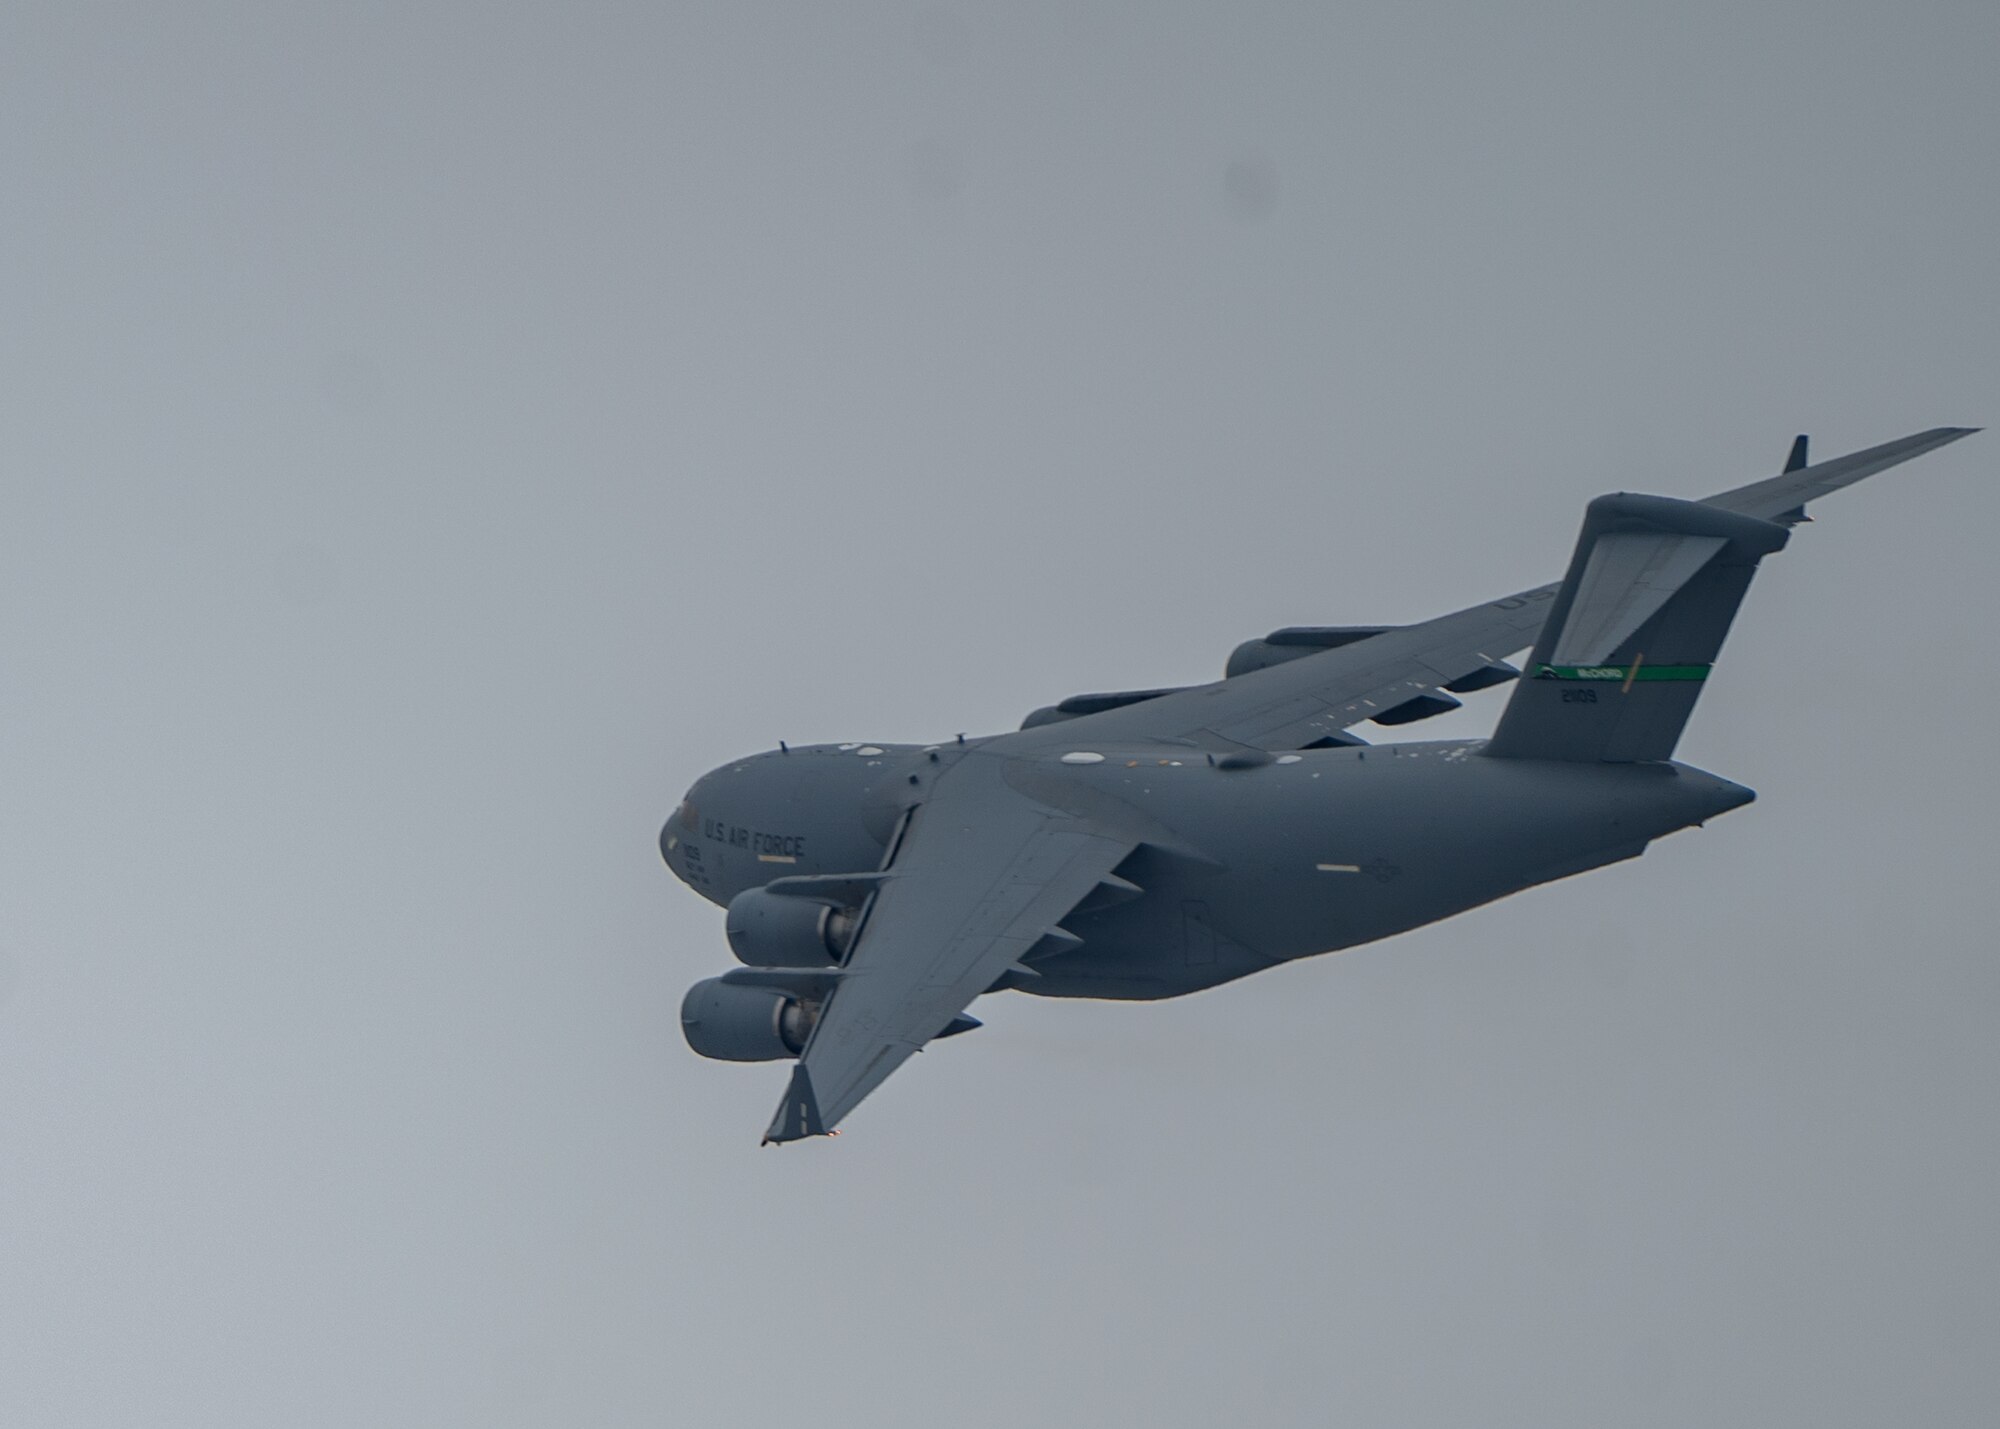 A C-17 Globemaster III assigned to Joint Base Lewis-McChord, Washington, flies over Joint Base Elmendorf-Richardson, Alaska, during Exercise Rainer War 22-A March 18, 2022. The exercise is designed to demonstrate the wing’s ability to operate and survive while defeating challenges to the U.S. military advantage in all operating domains – air, land, sea and cyberspace. (U.S. Air Force photo by Airman 1st Class Charles Casner)